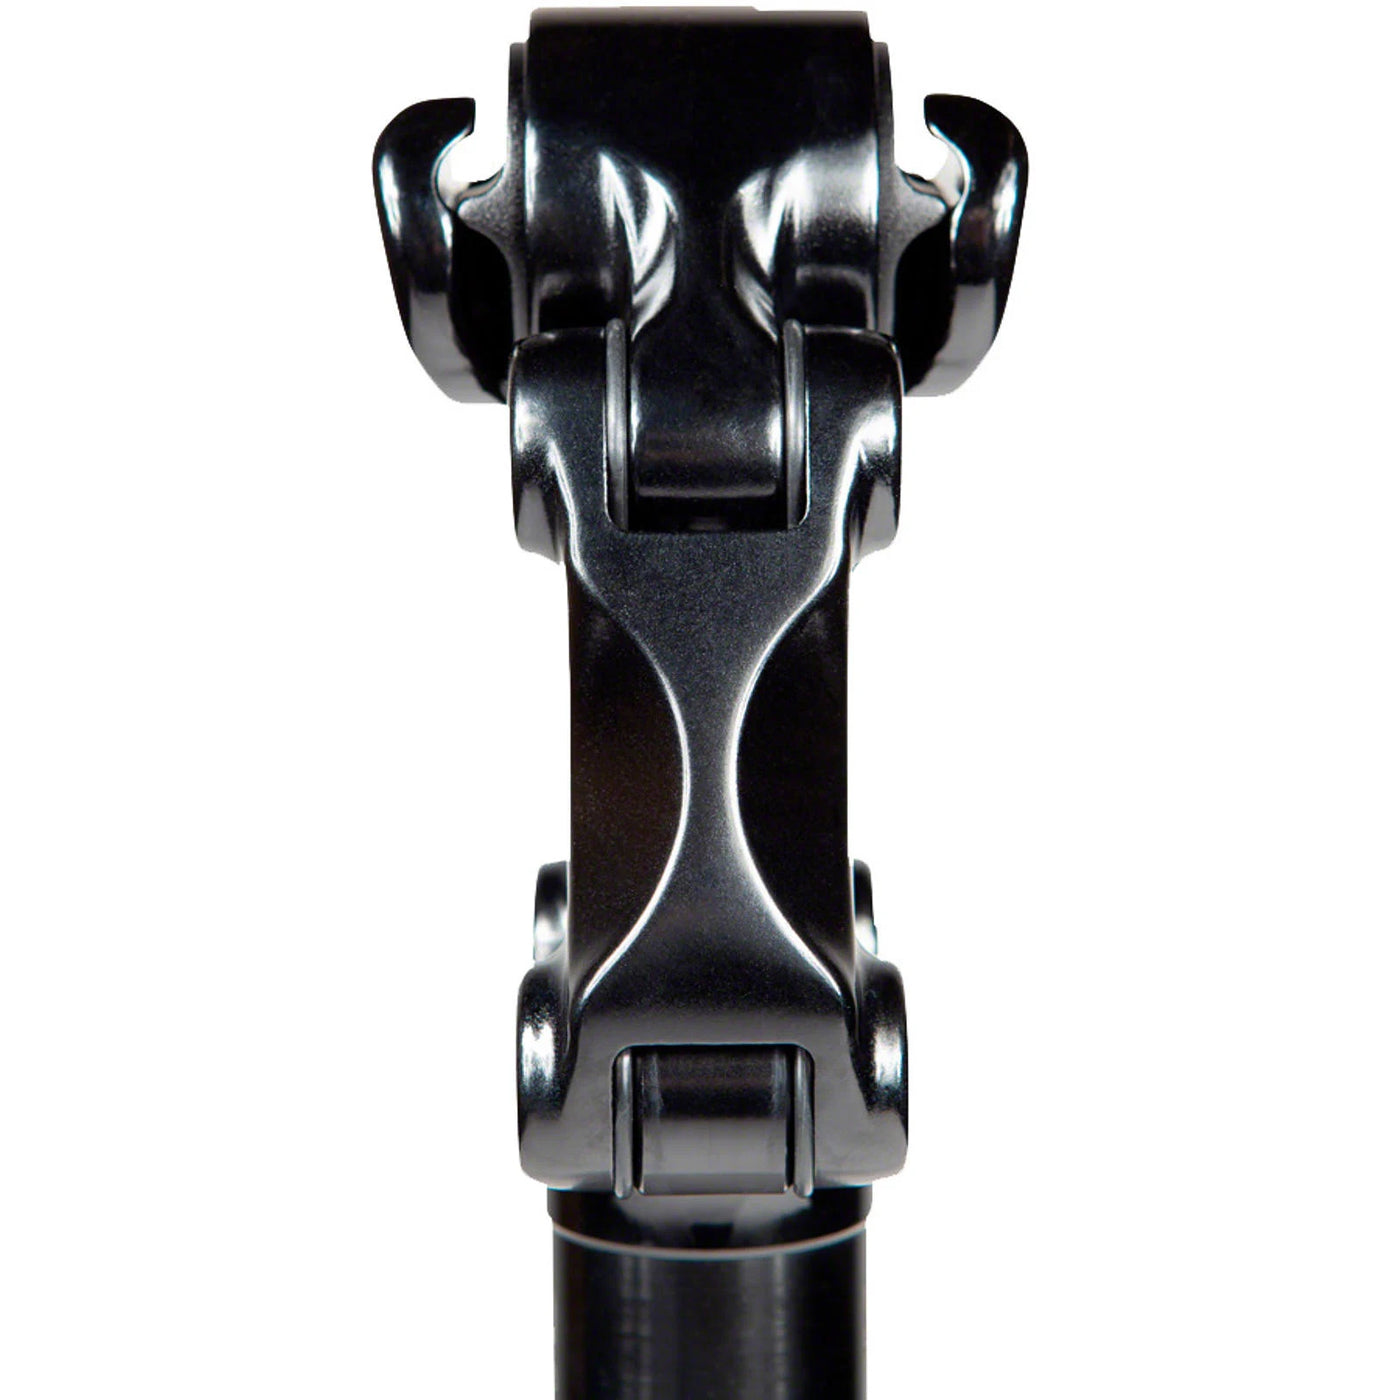 Cane Creek G4 Thudbuster ST Suspension Seatpost 31.6mm